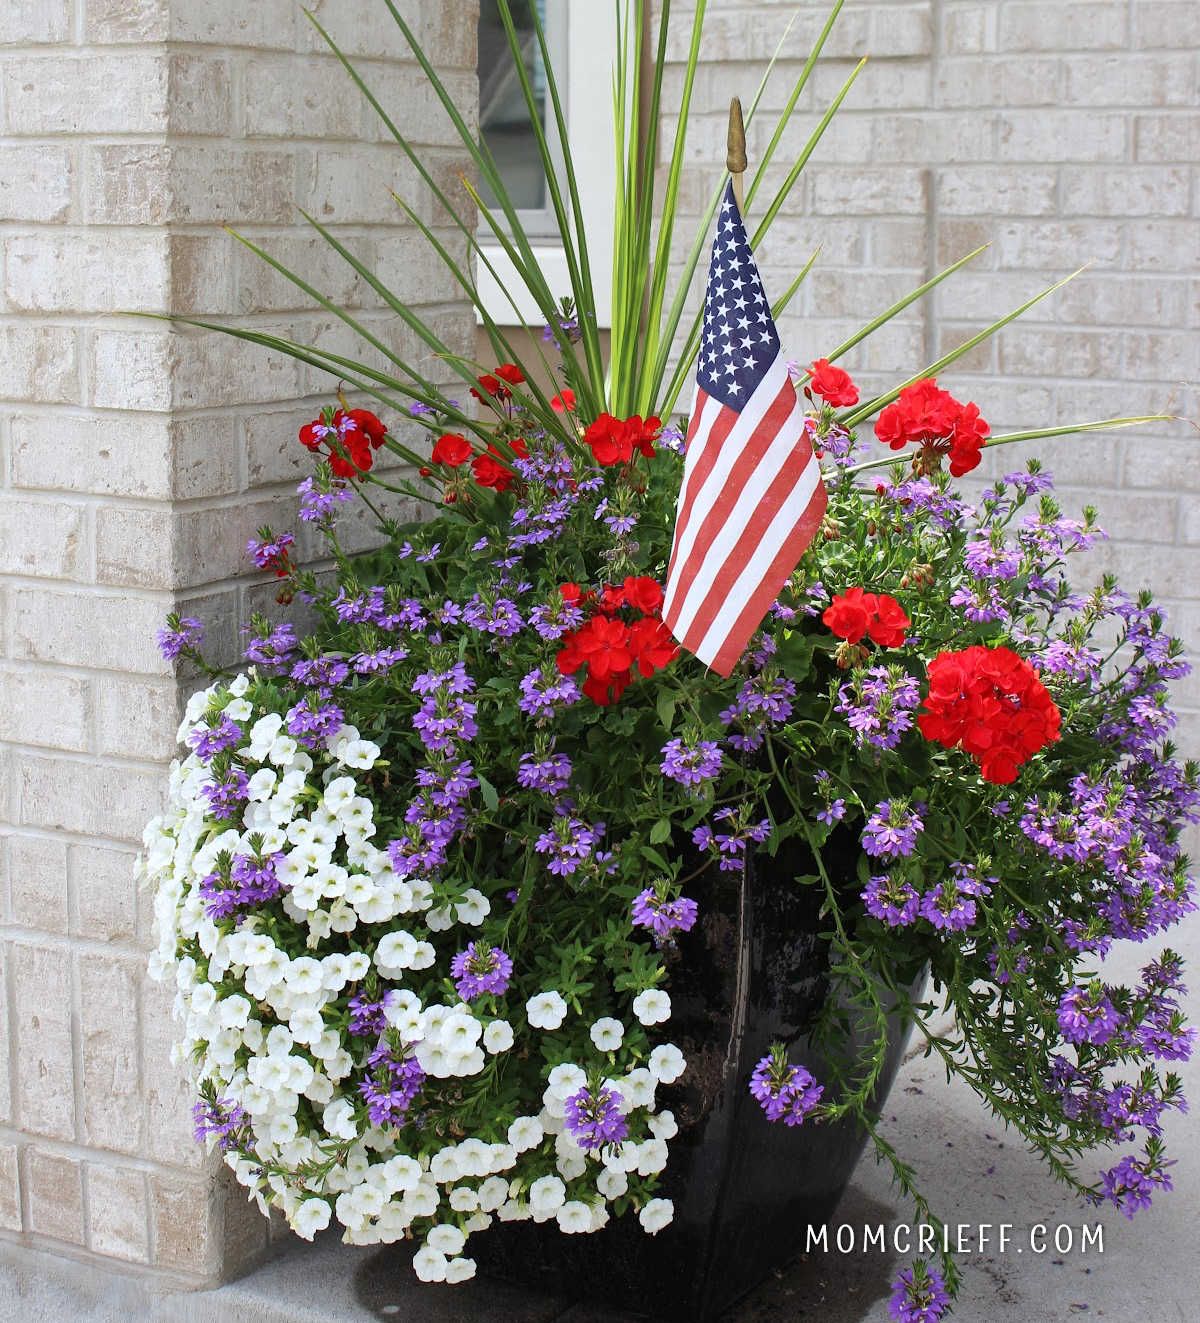 red geraniums anchoring the red white and blue themed planter